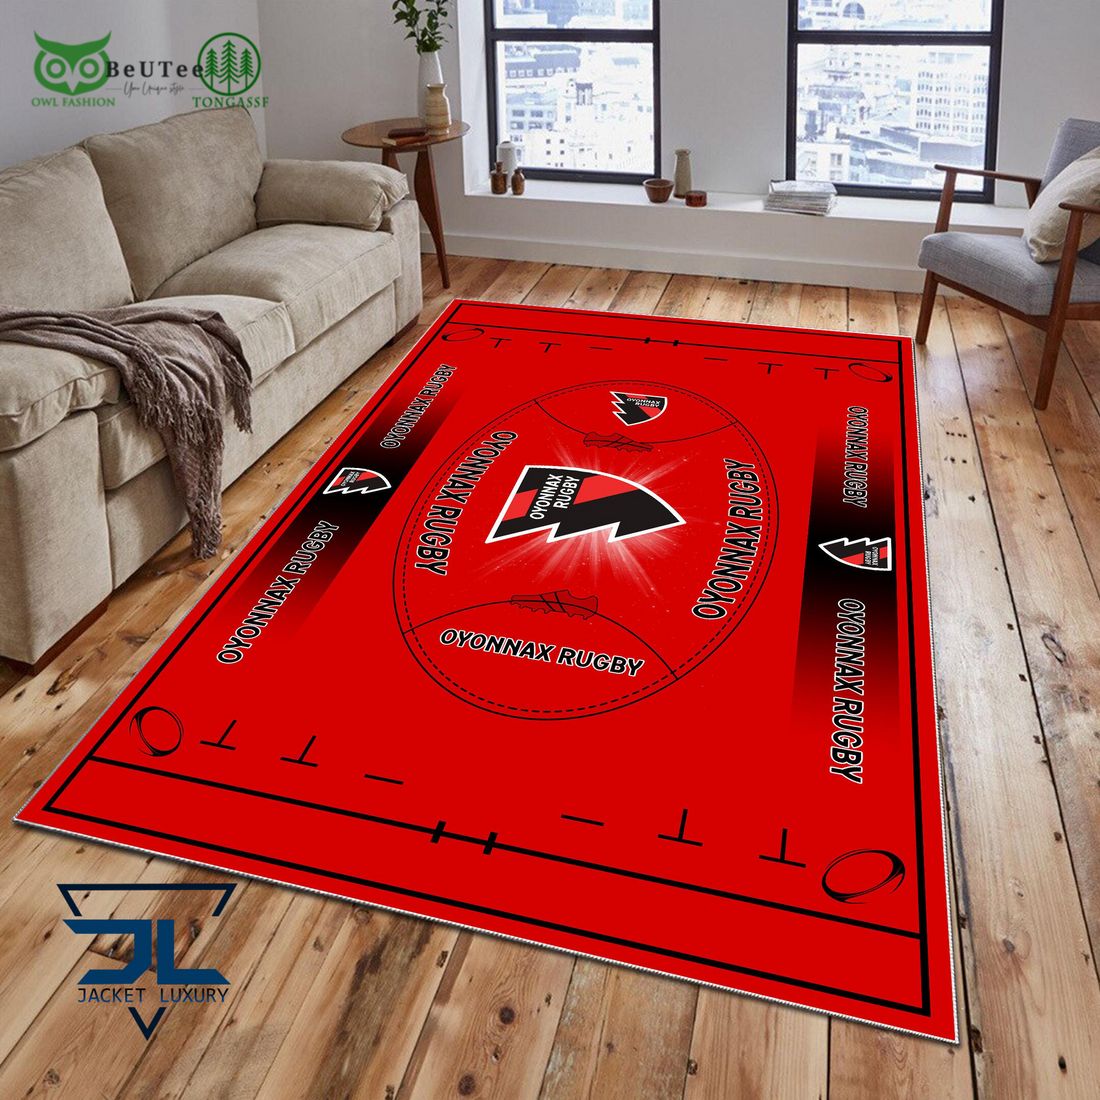 us oyonnax rugby french rugby carpet rug 1 KMO1h